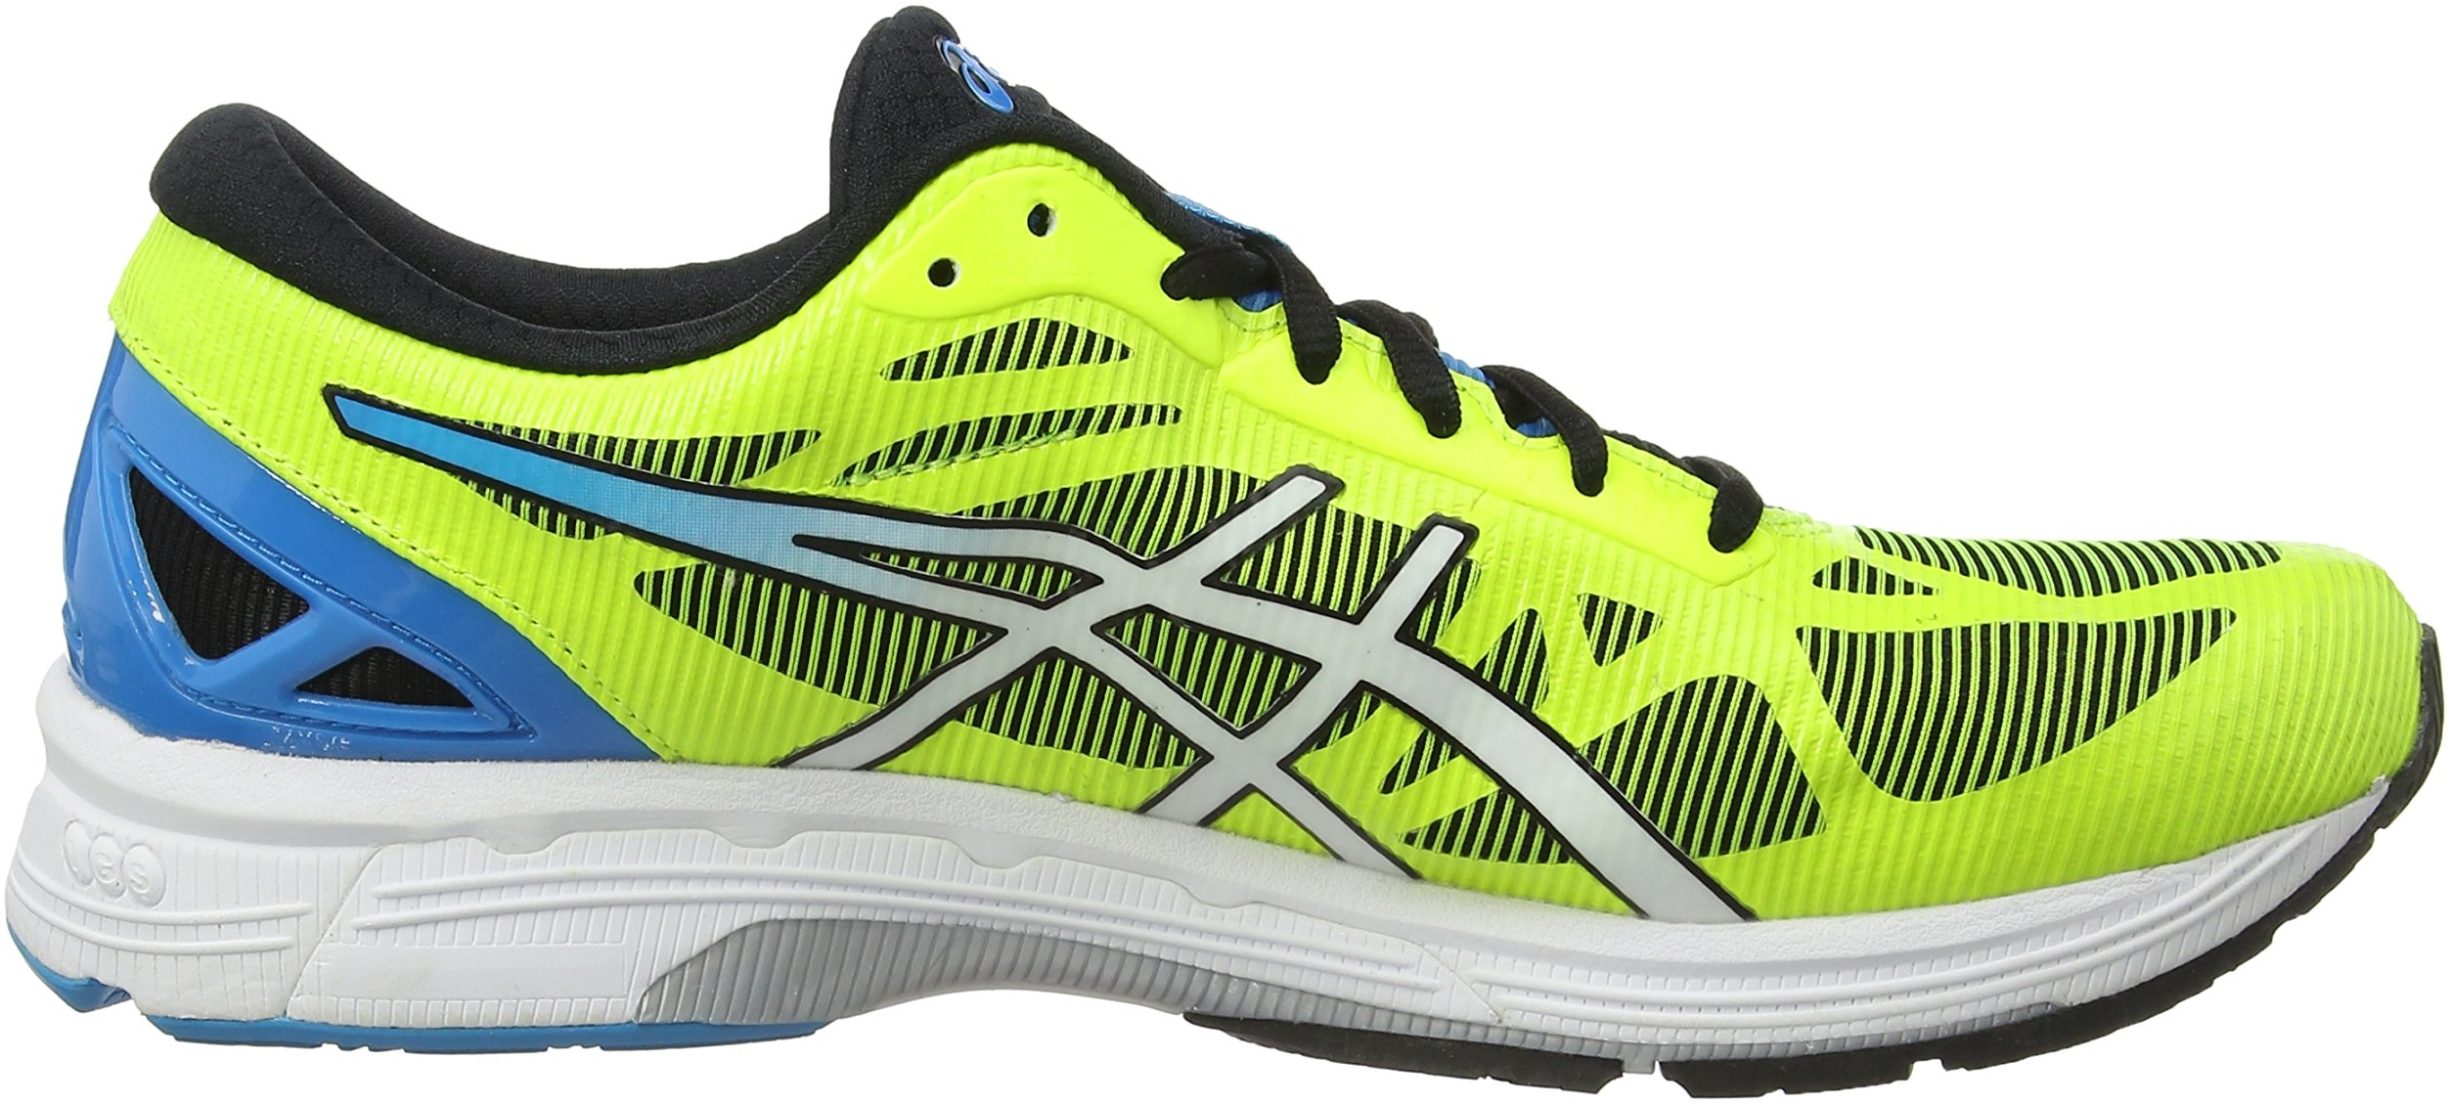 9 Reasons To Not To Buy Asics Gel Ds Trainer May 21 Runrepeat